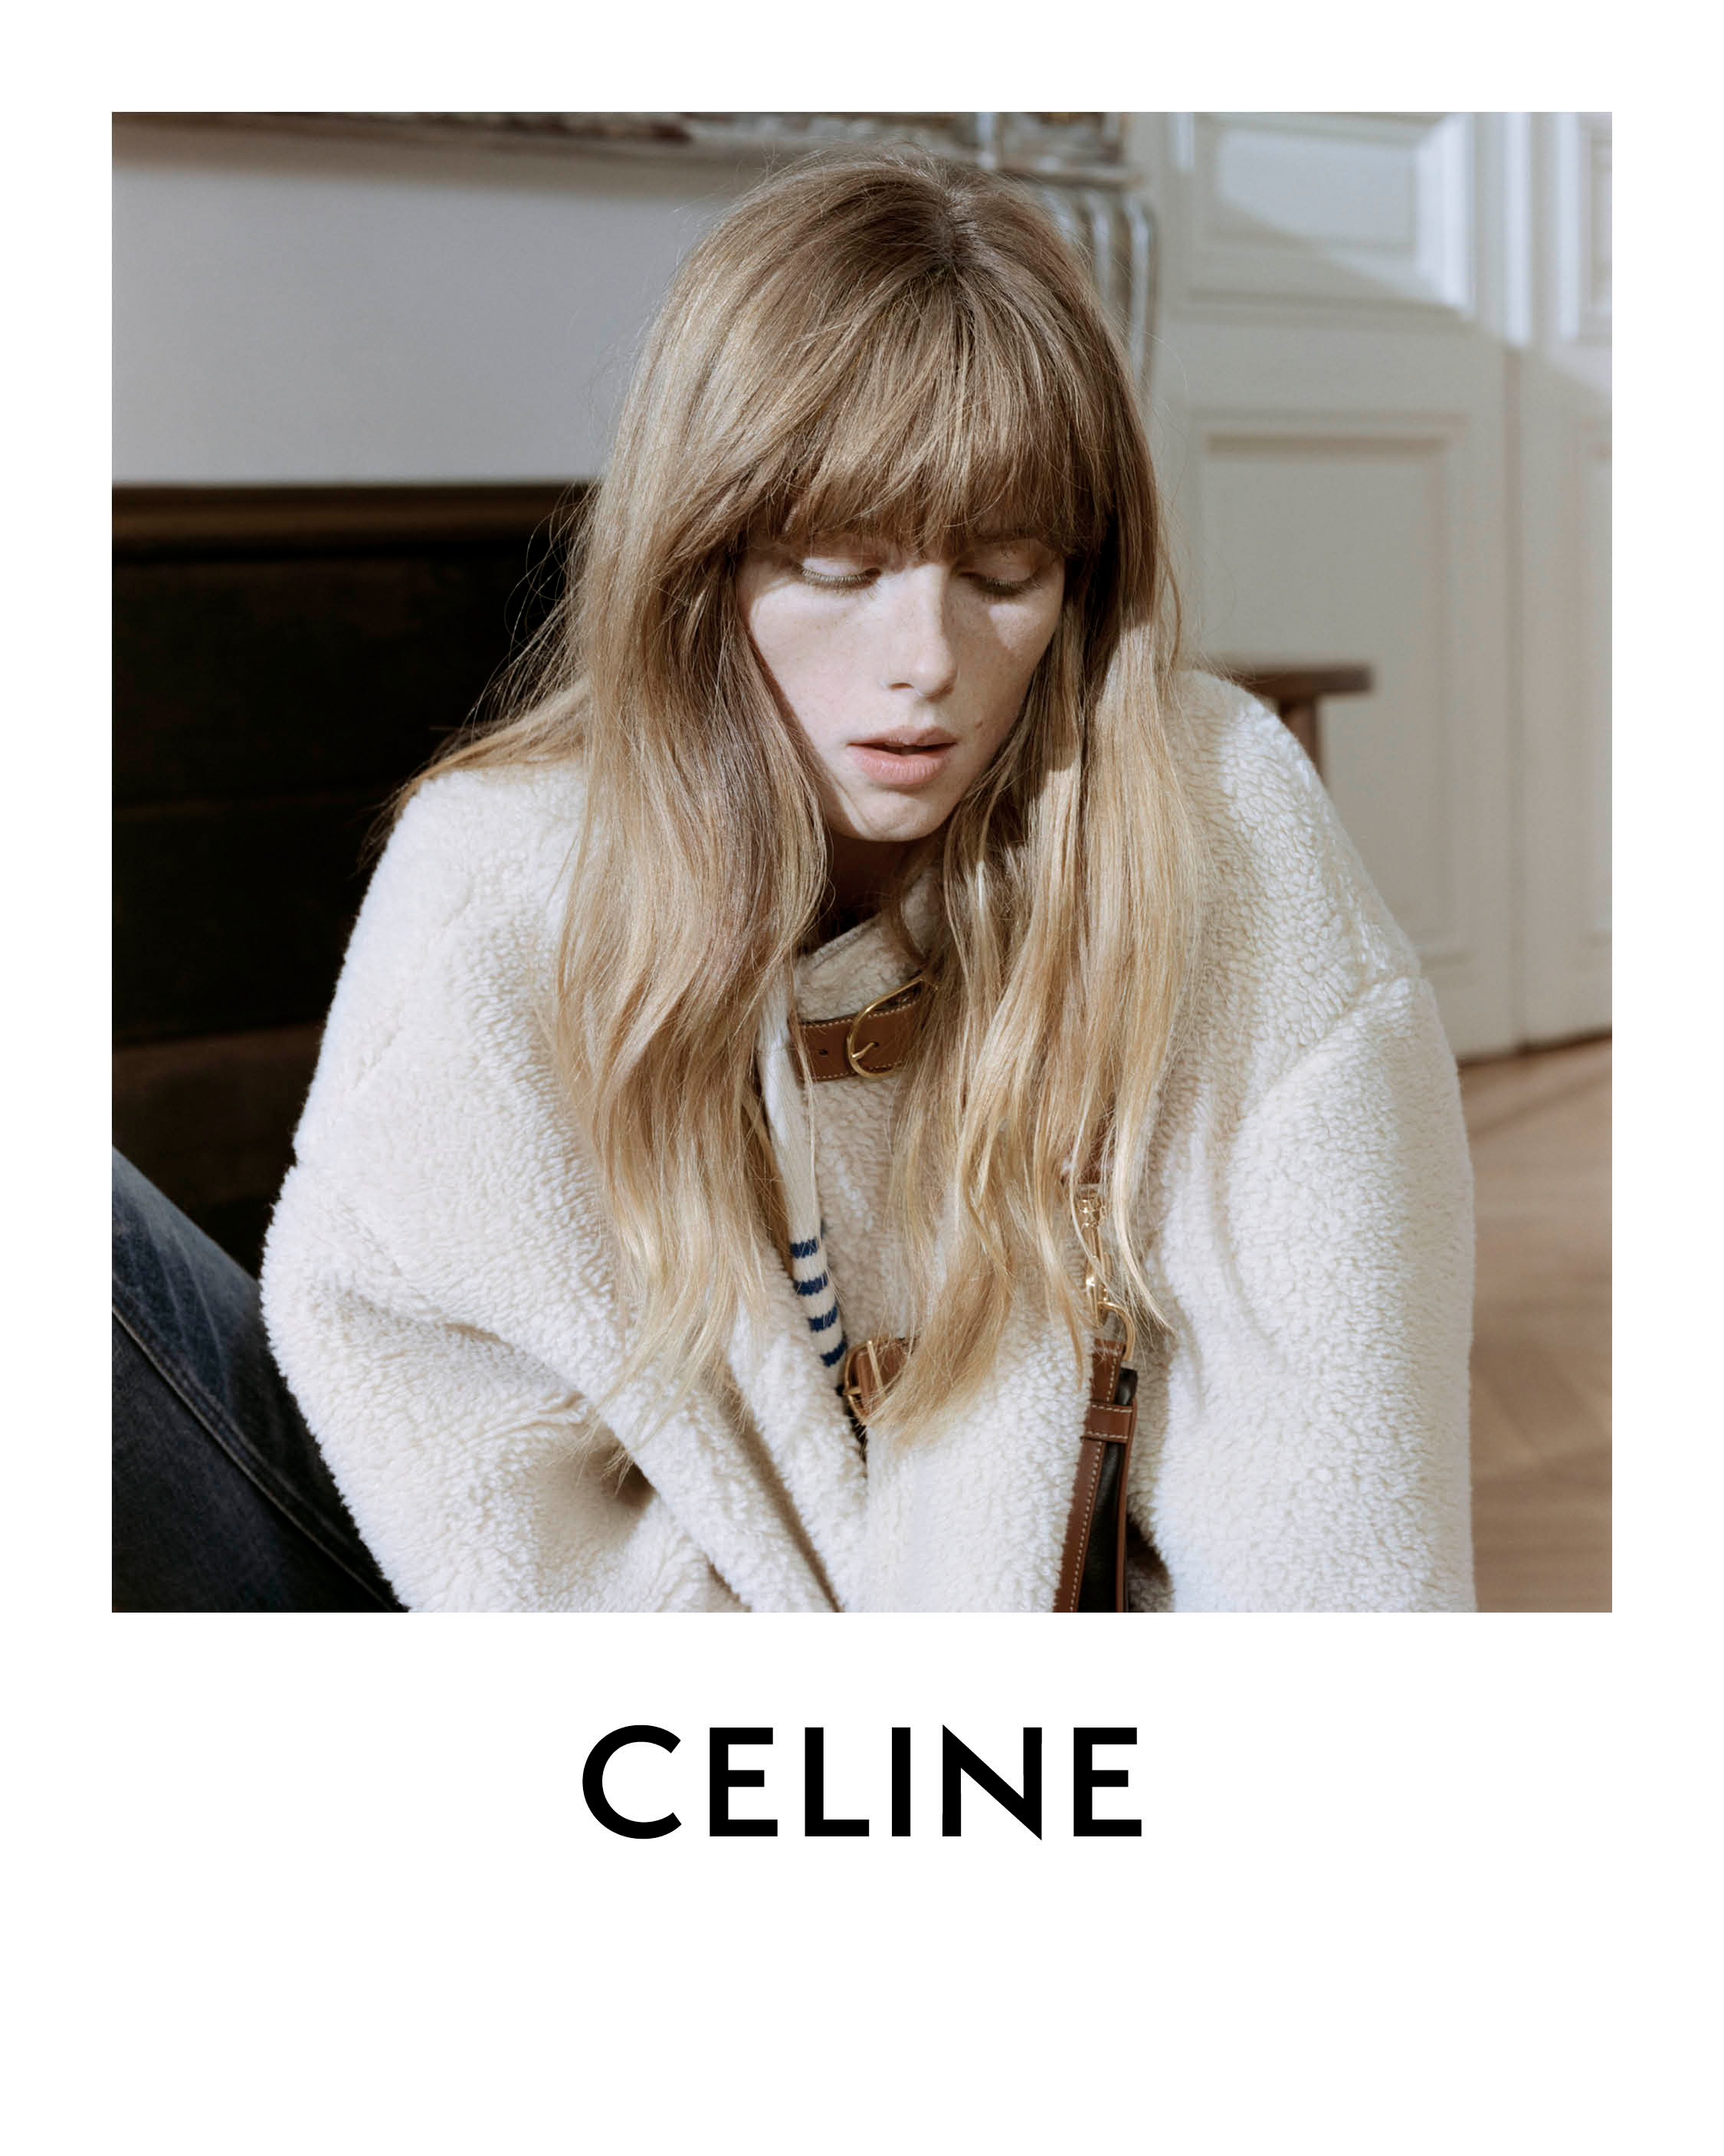 CELINE on X: LES GRANDS CLASSIQUES CELINE SESSION 3​ ​ CELINE CARDIGAN  JACKET WITH BUCKLE​ SILK AND CASHMERE FUR EFFECT​ ​ COLLECTION AVAILABLE  NOW IN STORE AND AT  ​ ​ RIANNE ​